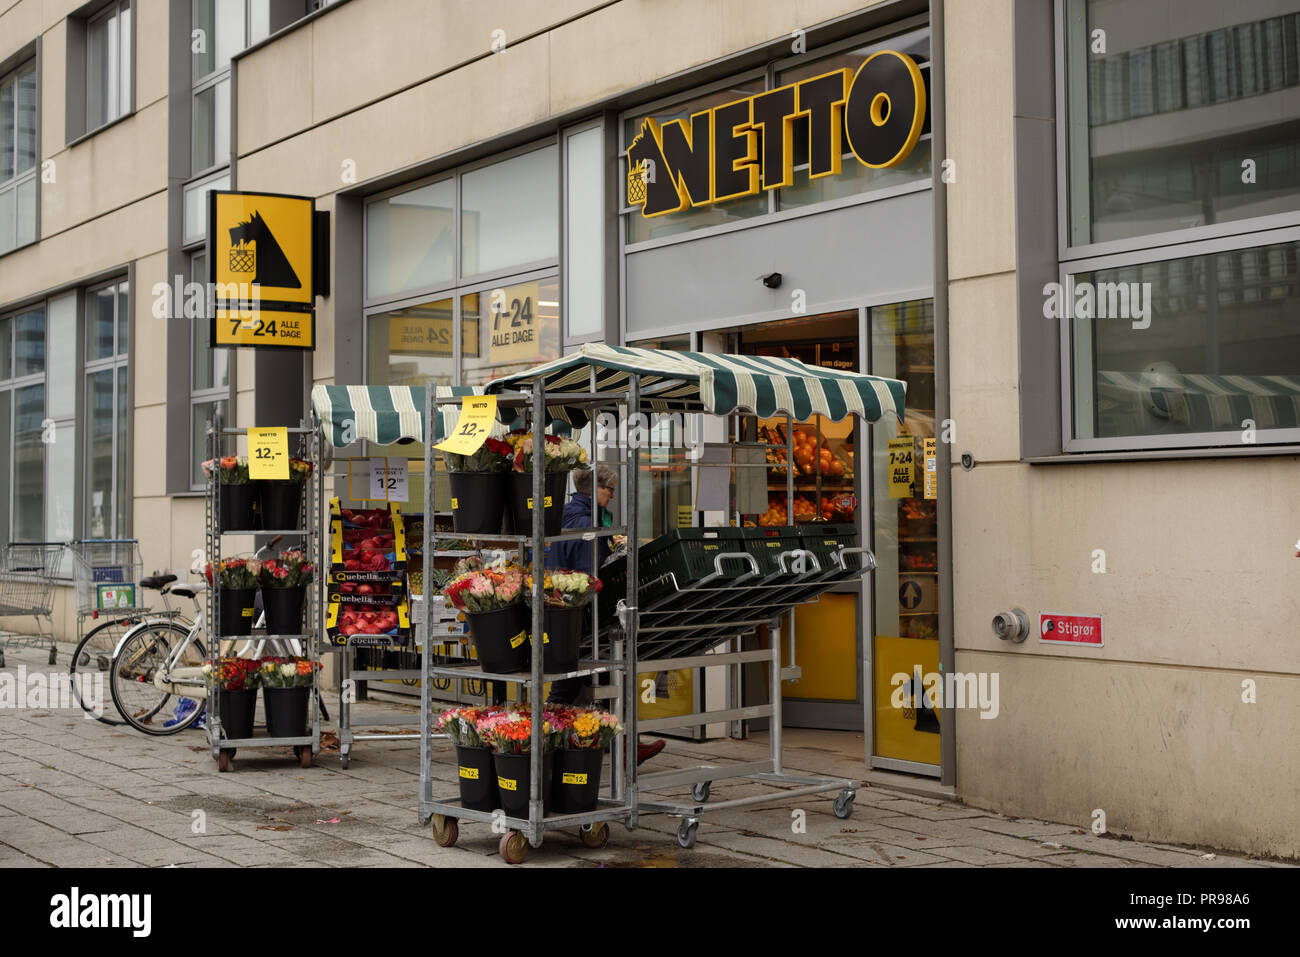 Copenhagen, Denmark - November 5, 2016: People at the entrance in a supermarket Netto. Netto entered on the supermarket scene in the 1980s when many D Stock Photo